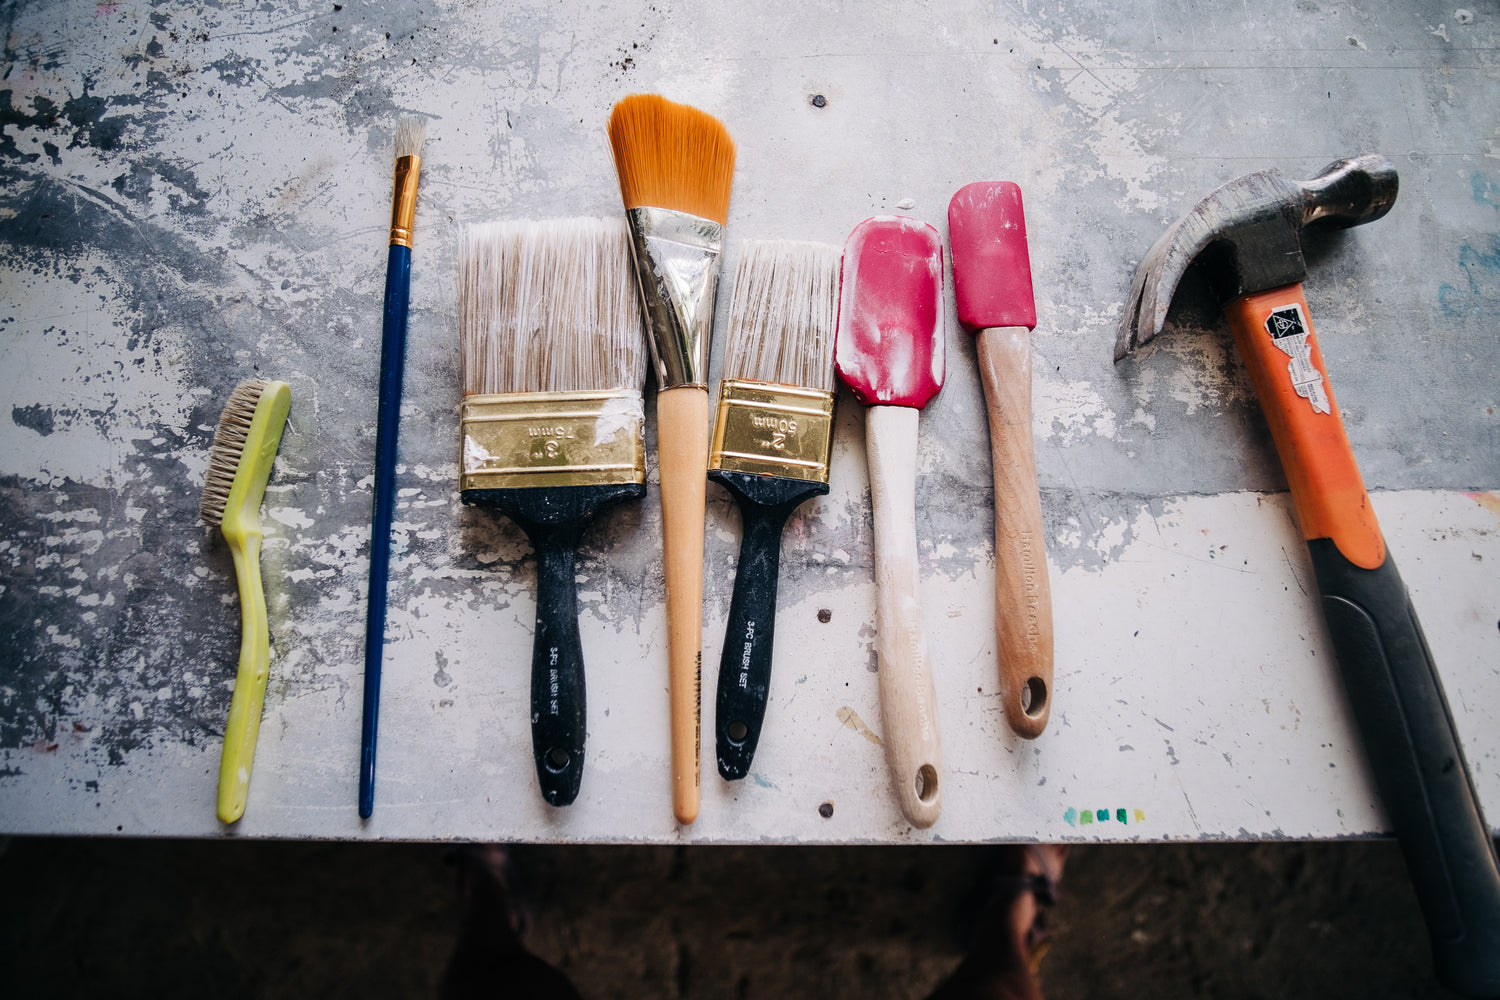 Artist's tools: Brushes, spatulas and a hammer